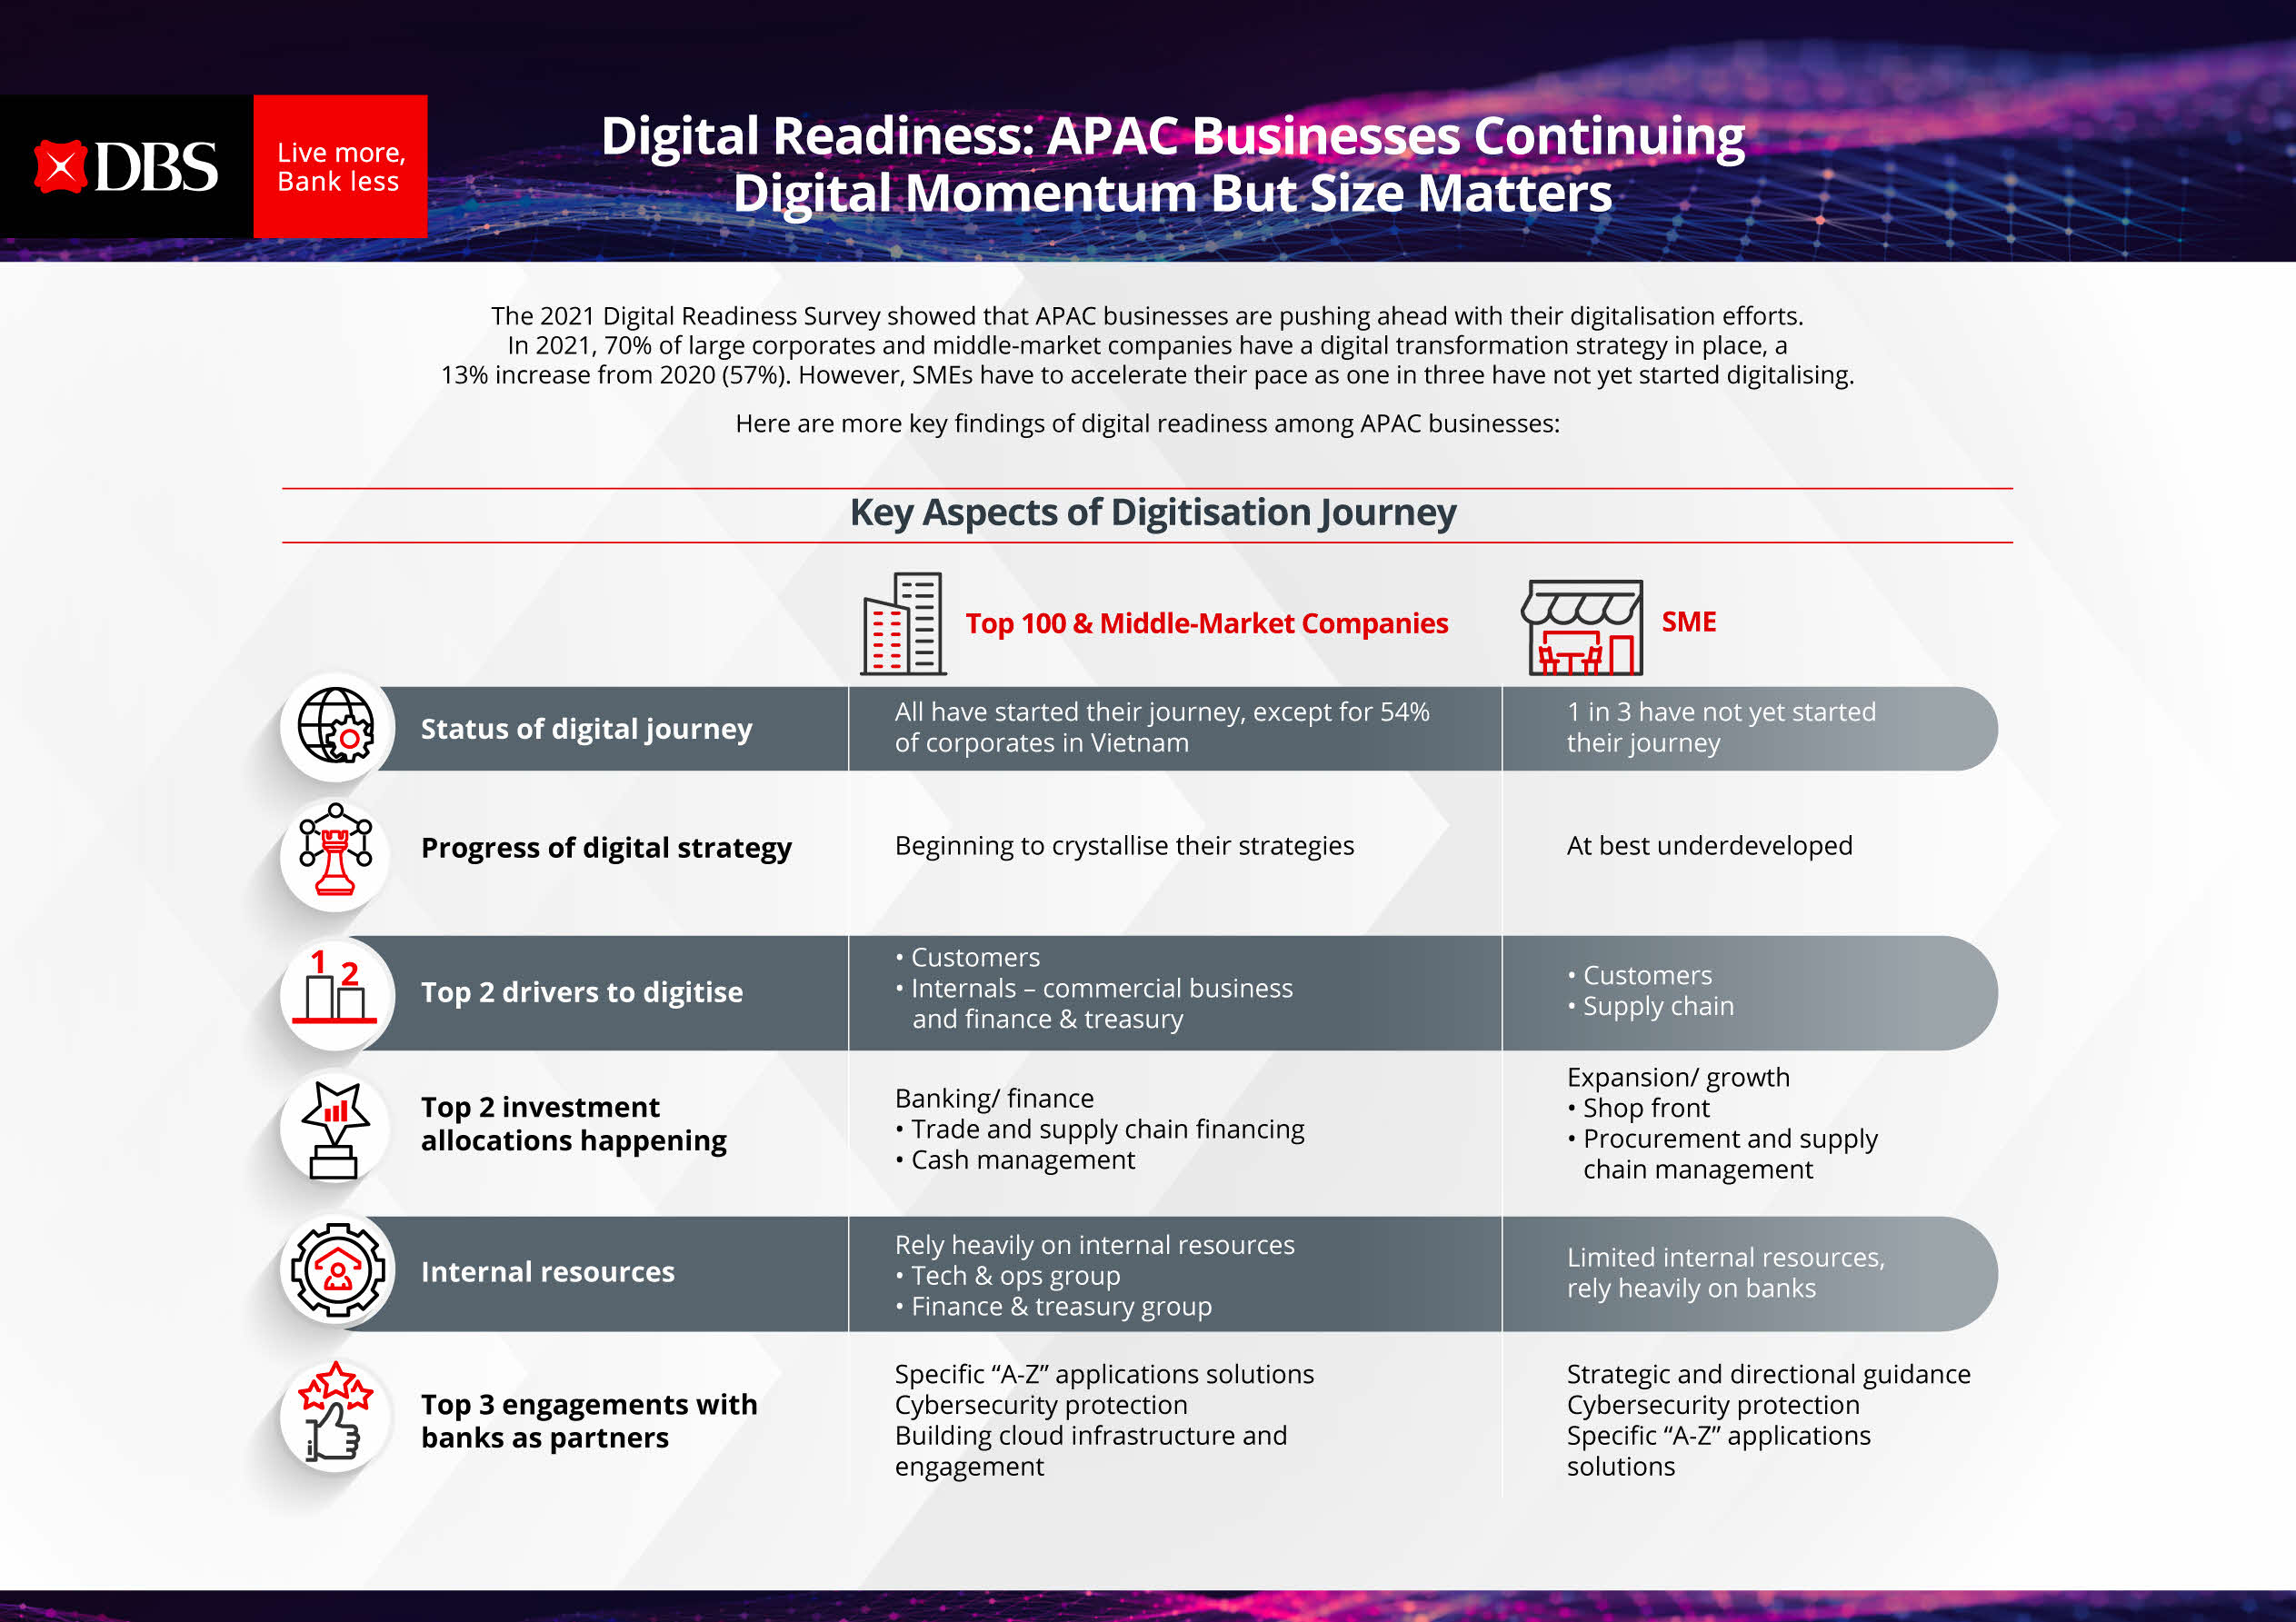 Digital-Readiness-Ranking-by-markets-Infographic